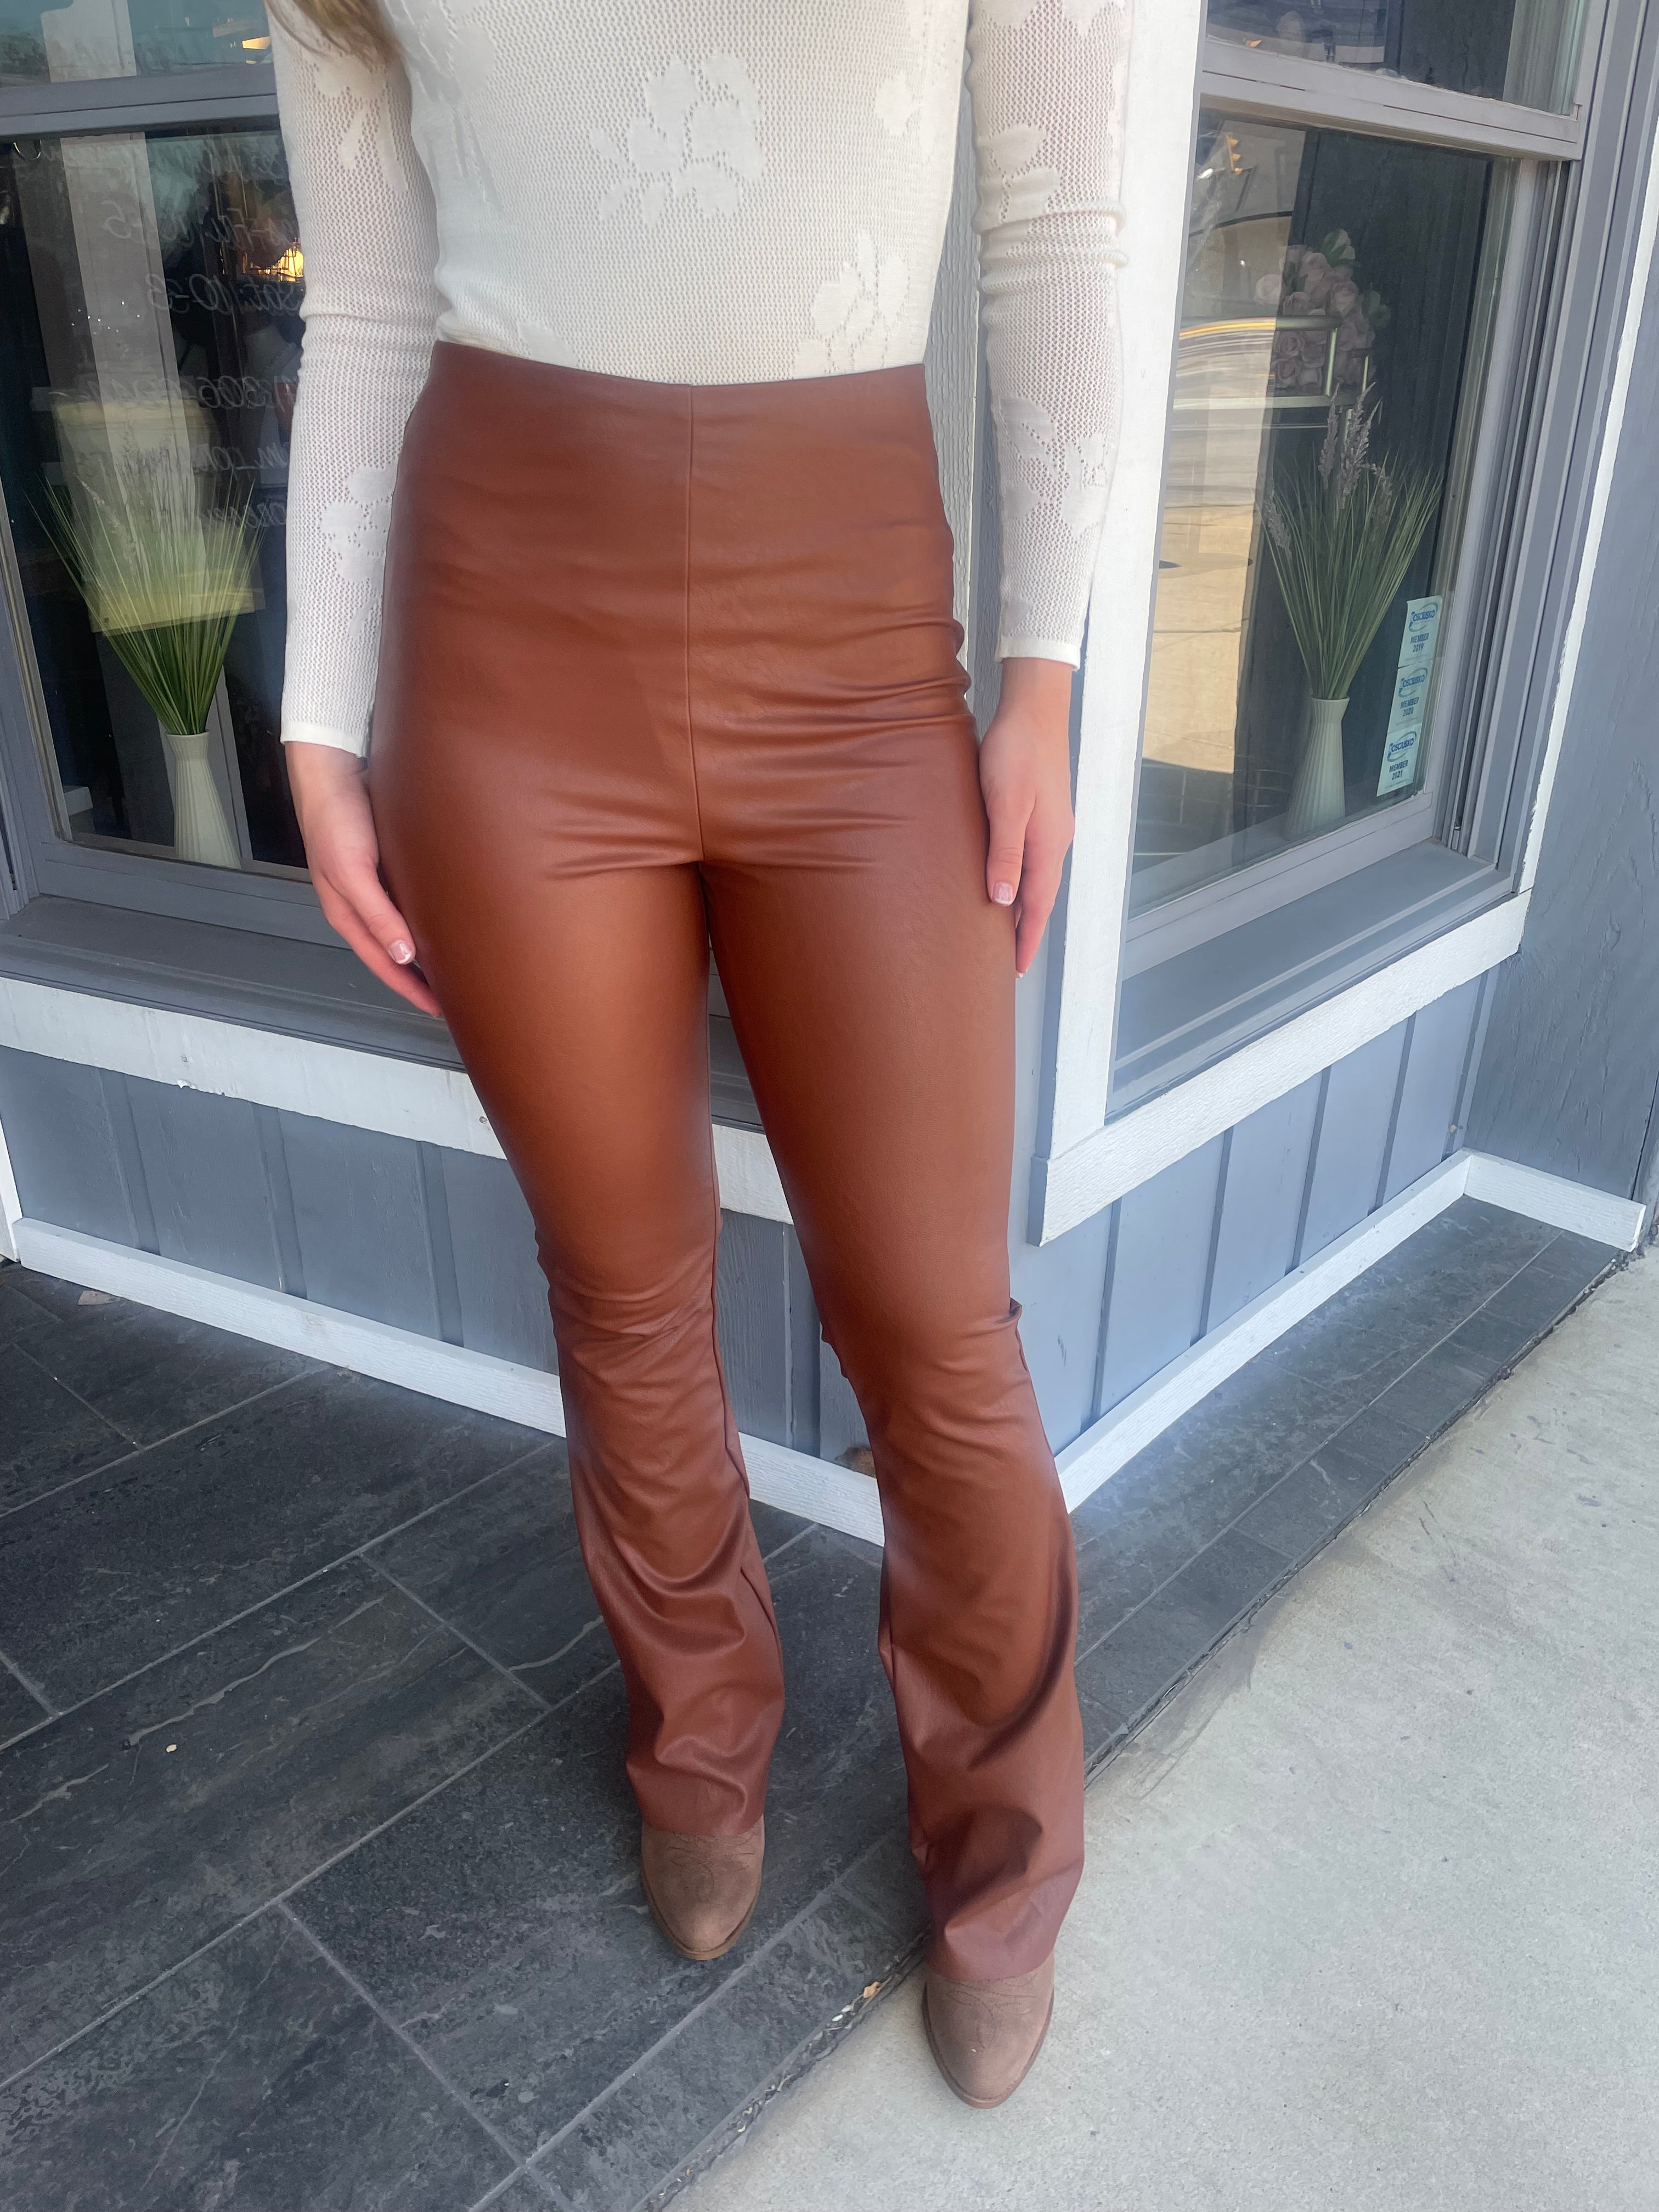 Leather flare pants 😍  Leather pants, Leather pants outfit, Flared pants  outfit